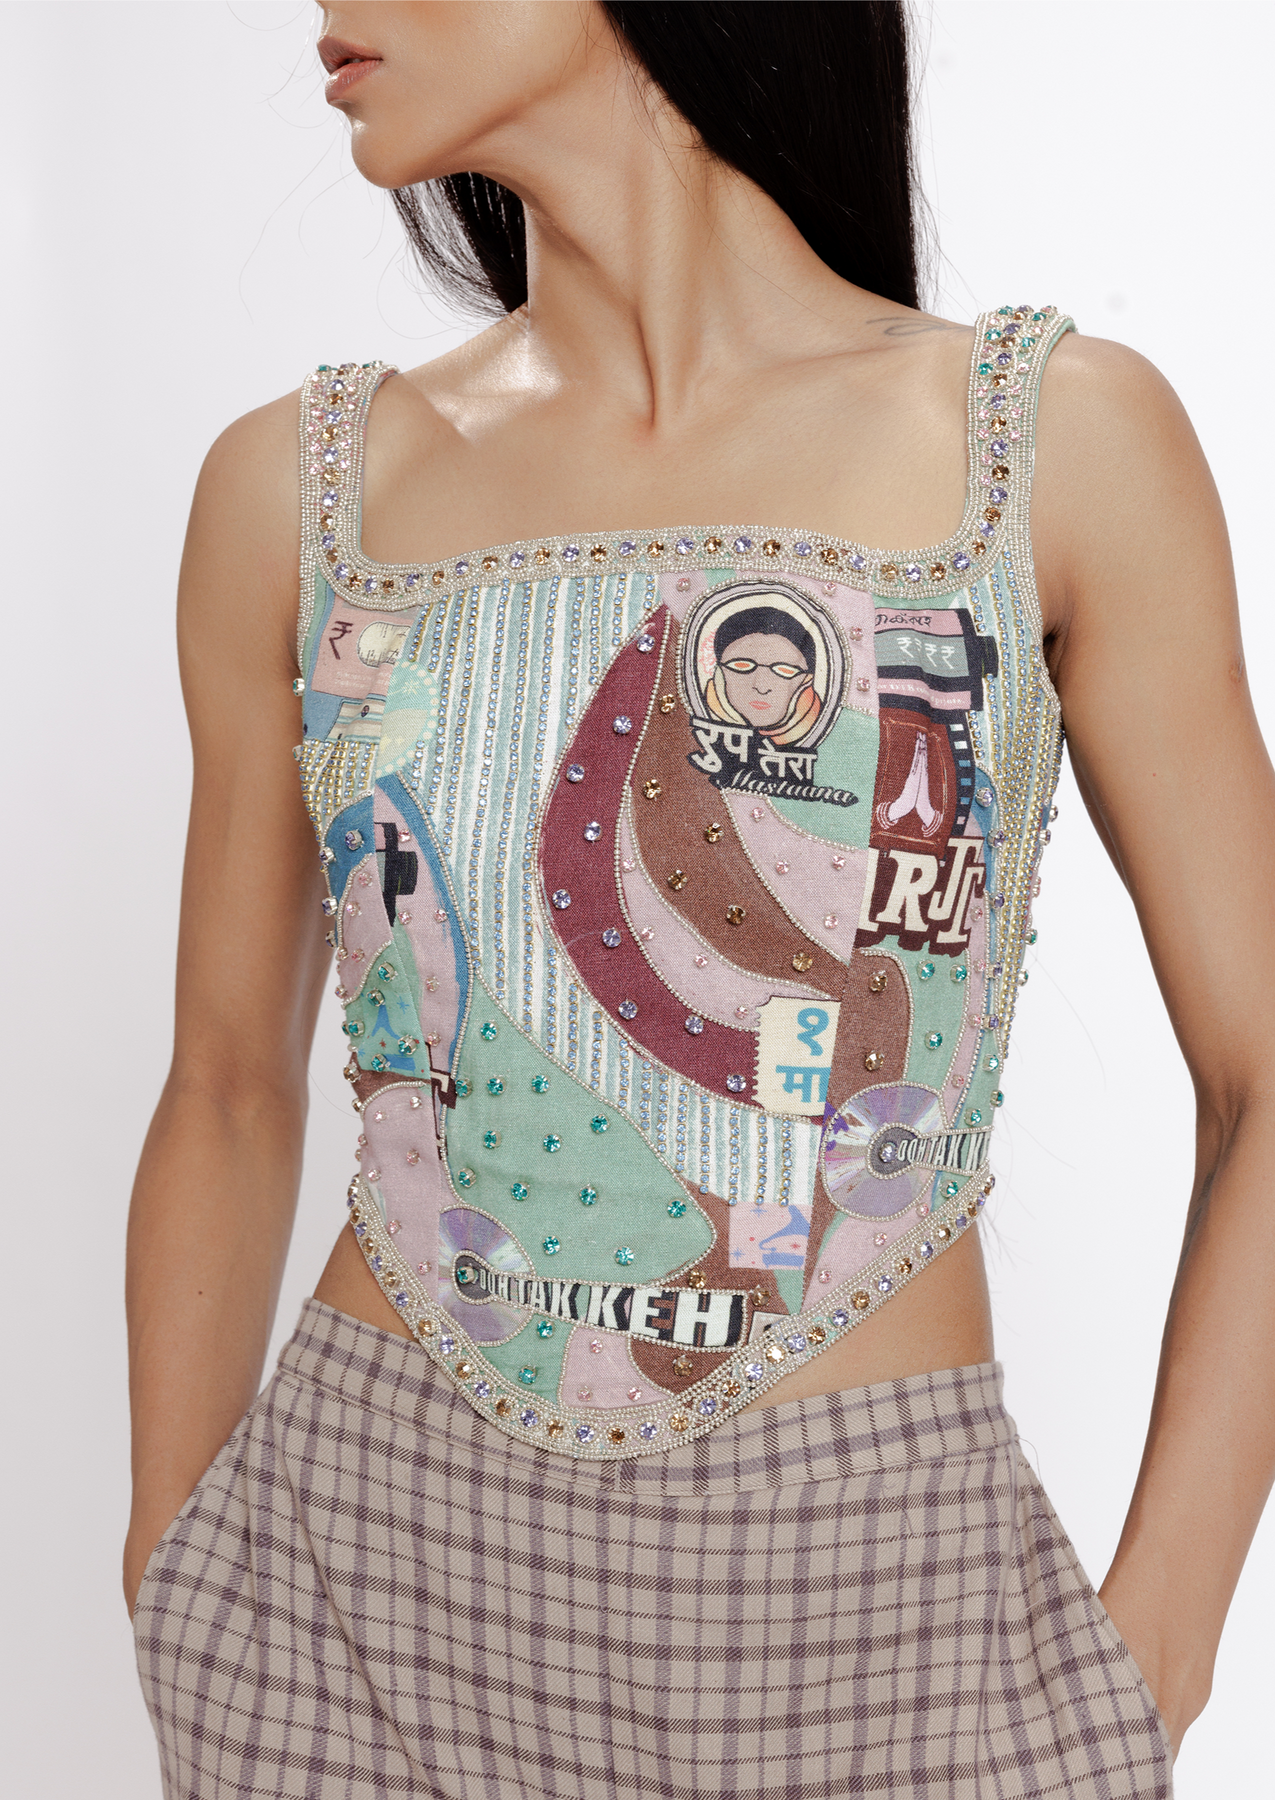 FILMY EMBROIDERED CORSET, a product by Doh tak keh